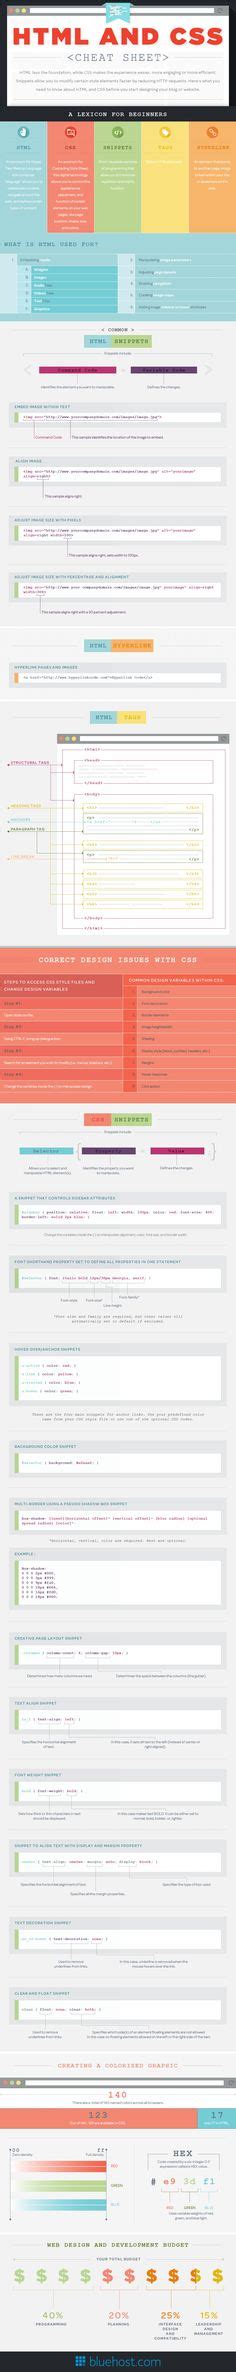 Html And Css Cheat Sheet Infographic Web Design Tips Web Design